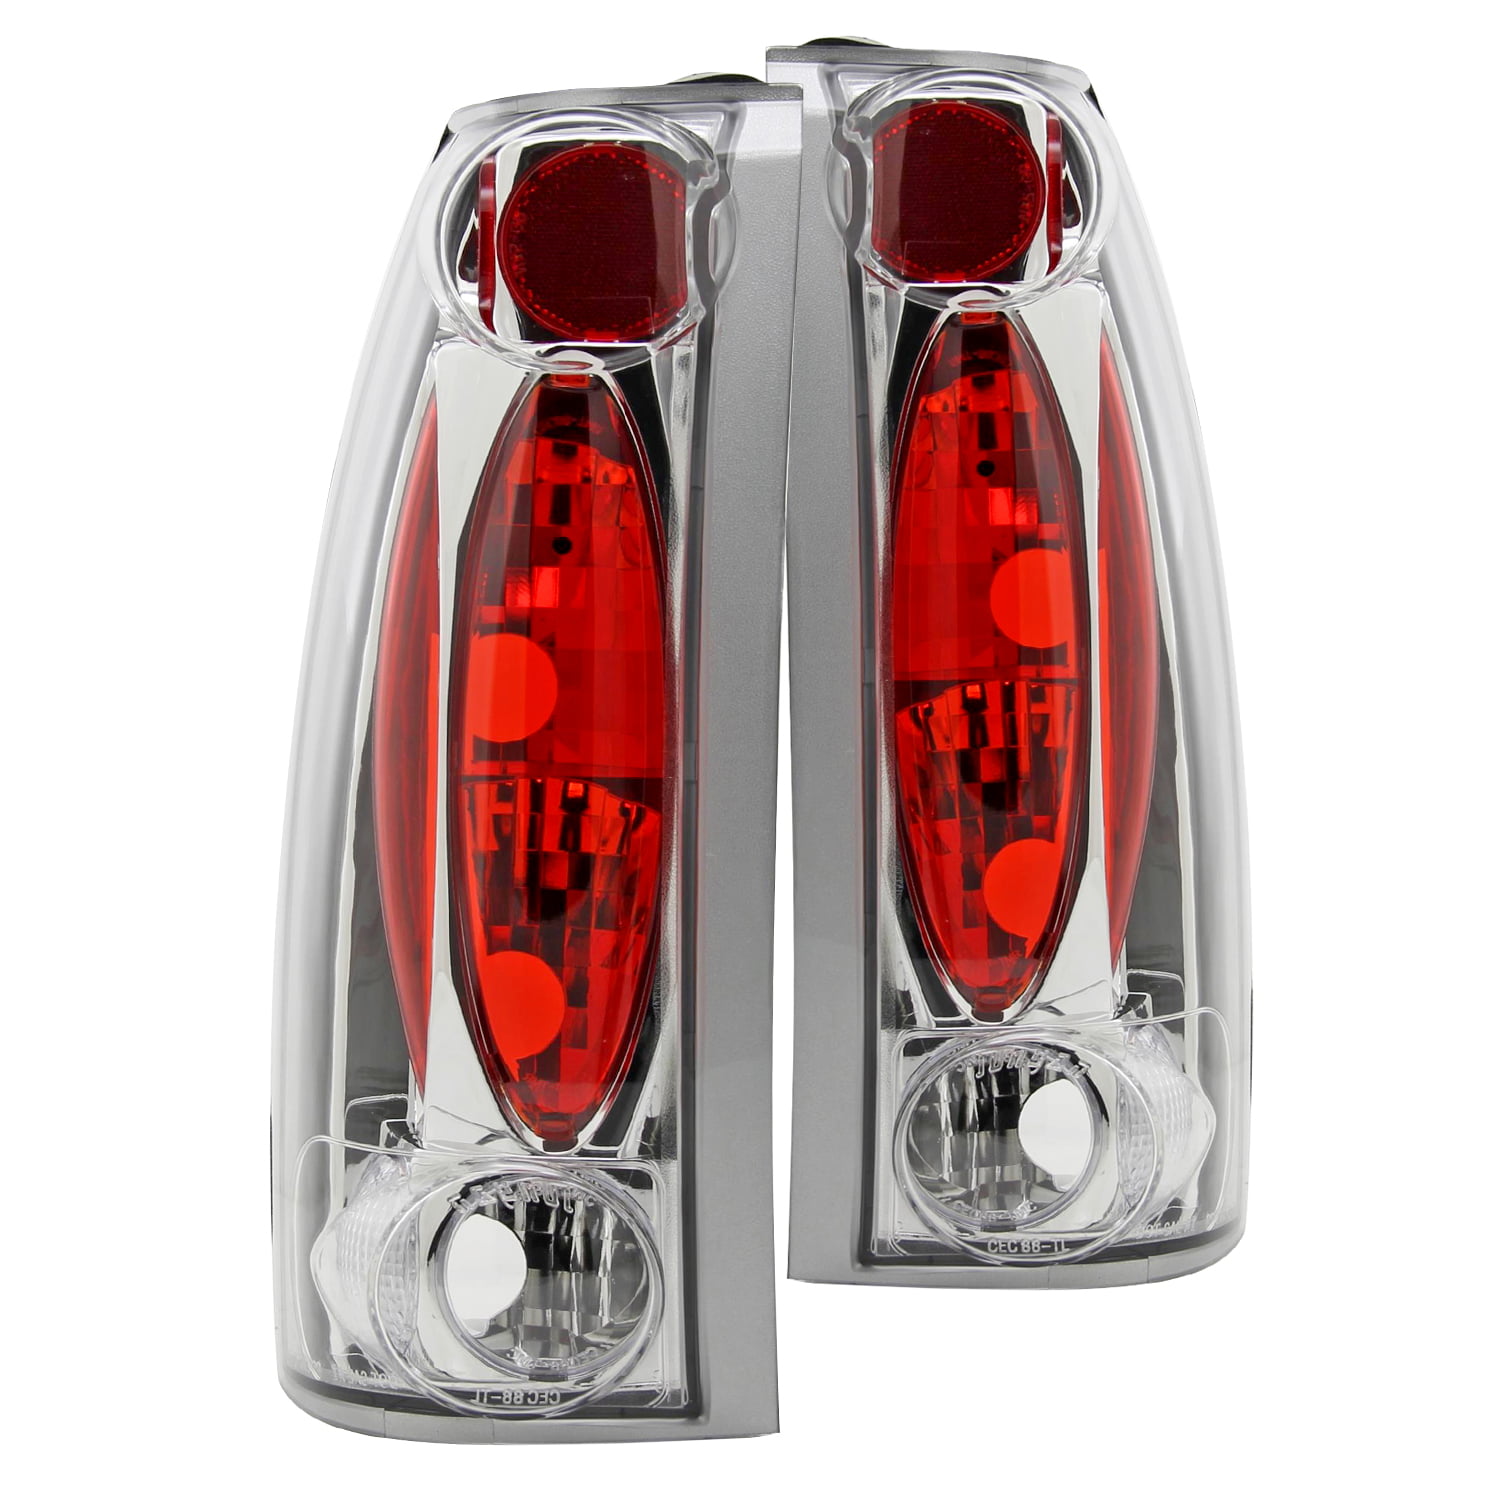 Spec-D Tuning Chrome Housing Clear Lens LED Tail Lights for 1994-1998 Chevy C10 C/K 2500/3500 Taillights Assembly Left Right Pair 